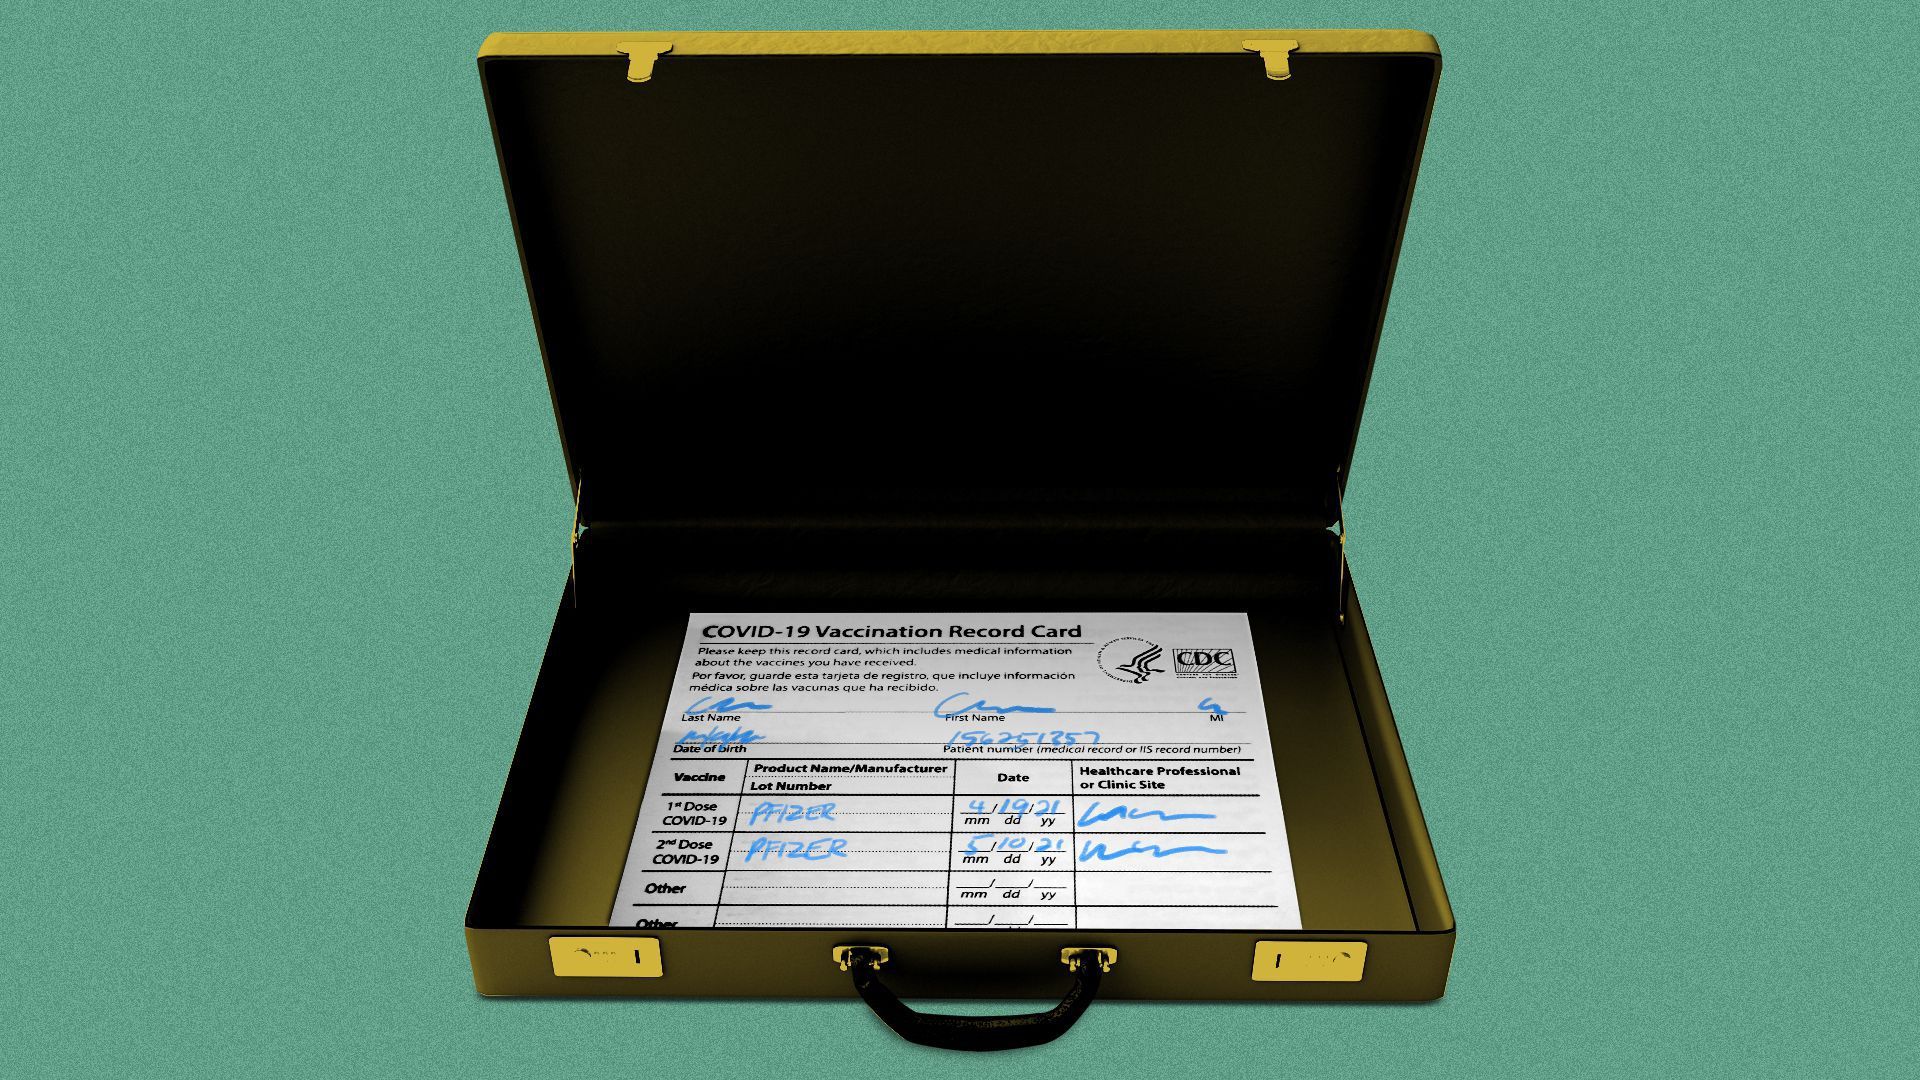 Image of a vaccine card inside an open briefcase